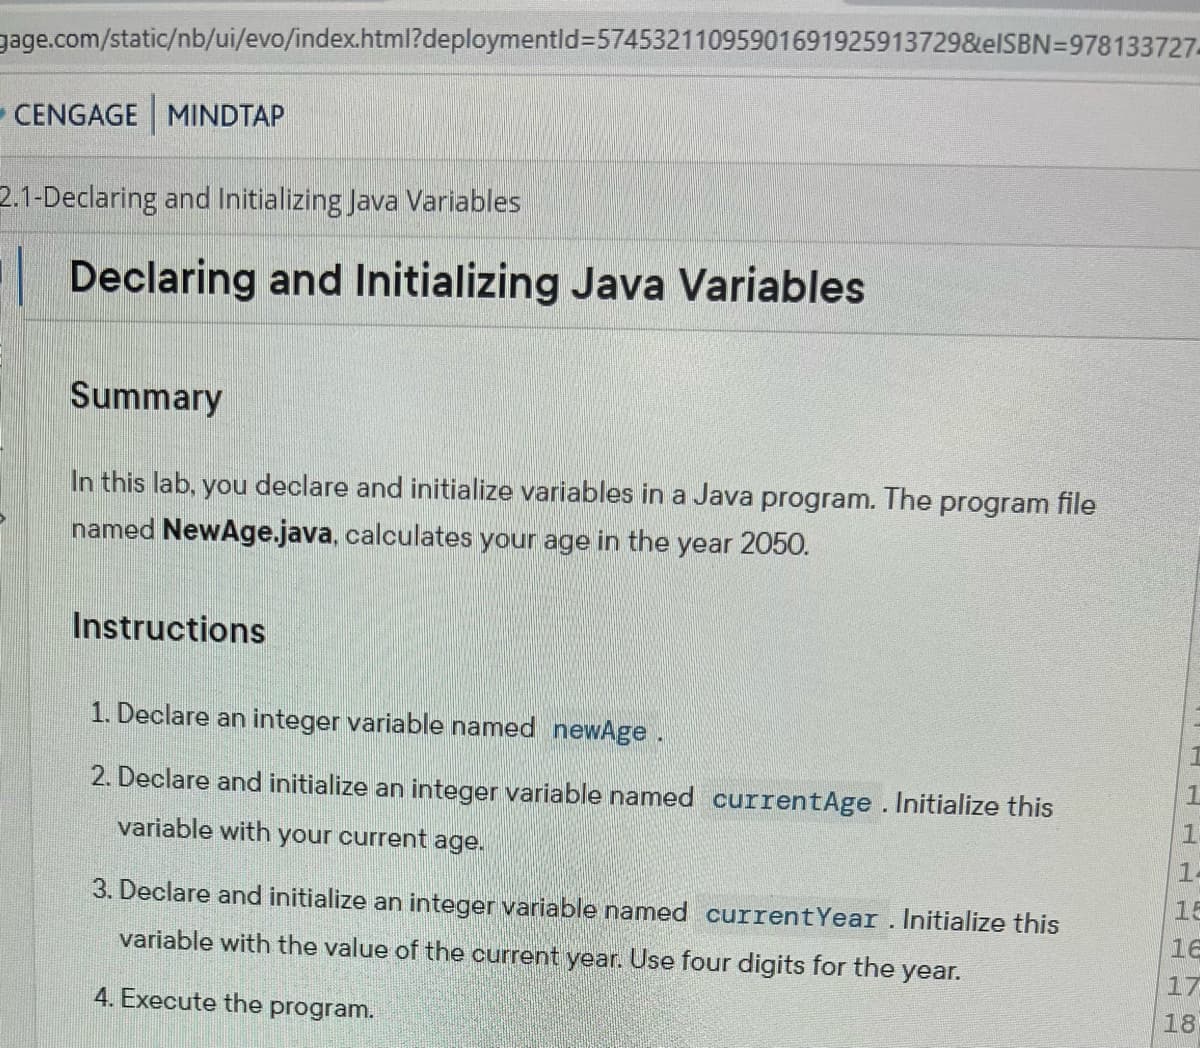 gage.com/static/nb/ui/evo/index.html?deploymentid=57453211095901691925913729&eISBN 978133727
CENGAGE MINDTAP
2.1-Declaring and Initializing Java Variables
Declaring and Initializing Java Variables
Summary
In this lab, you declare and initialize variables in a Java program. The program file
named NewAge.java, calculates your age in the year 2050.
Instructions
1. Declare an integer variable named newAge .
2. Declare and initialize an integer variable named currentAge . Initialize this
variable with your current age.
3. Declare and initialize an integer variable named current Year. Initialize this
variable with the value of the current year. Use four digits for the
4. Execute the program.
year.
1
14
16
17
18